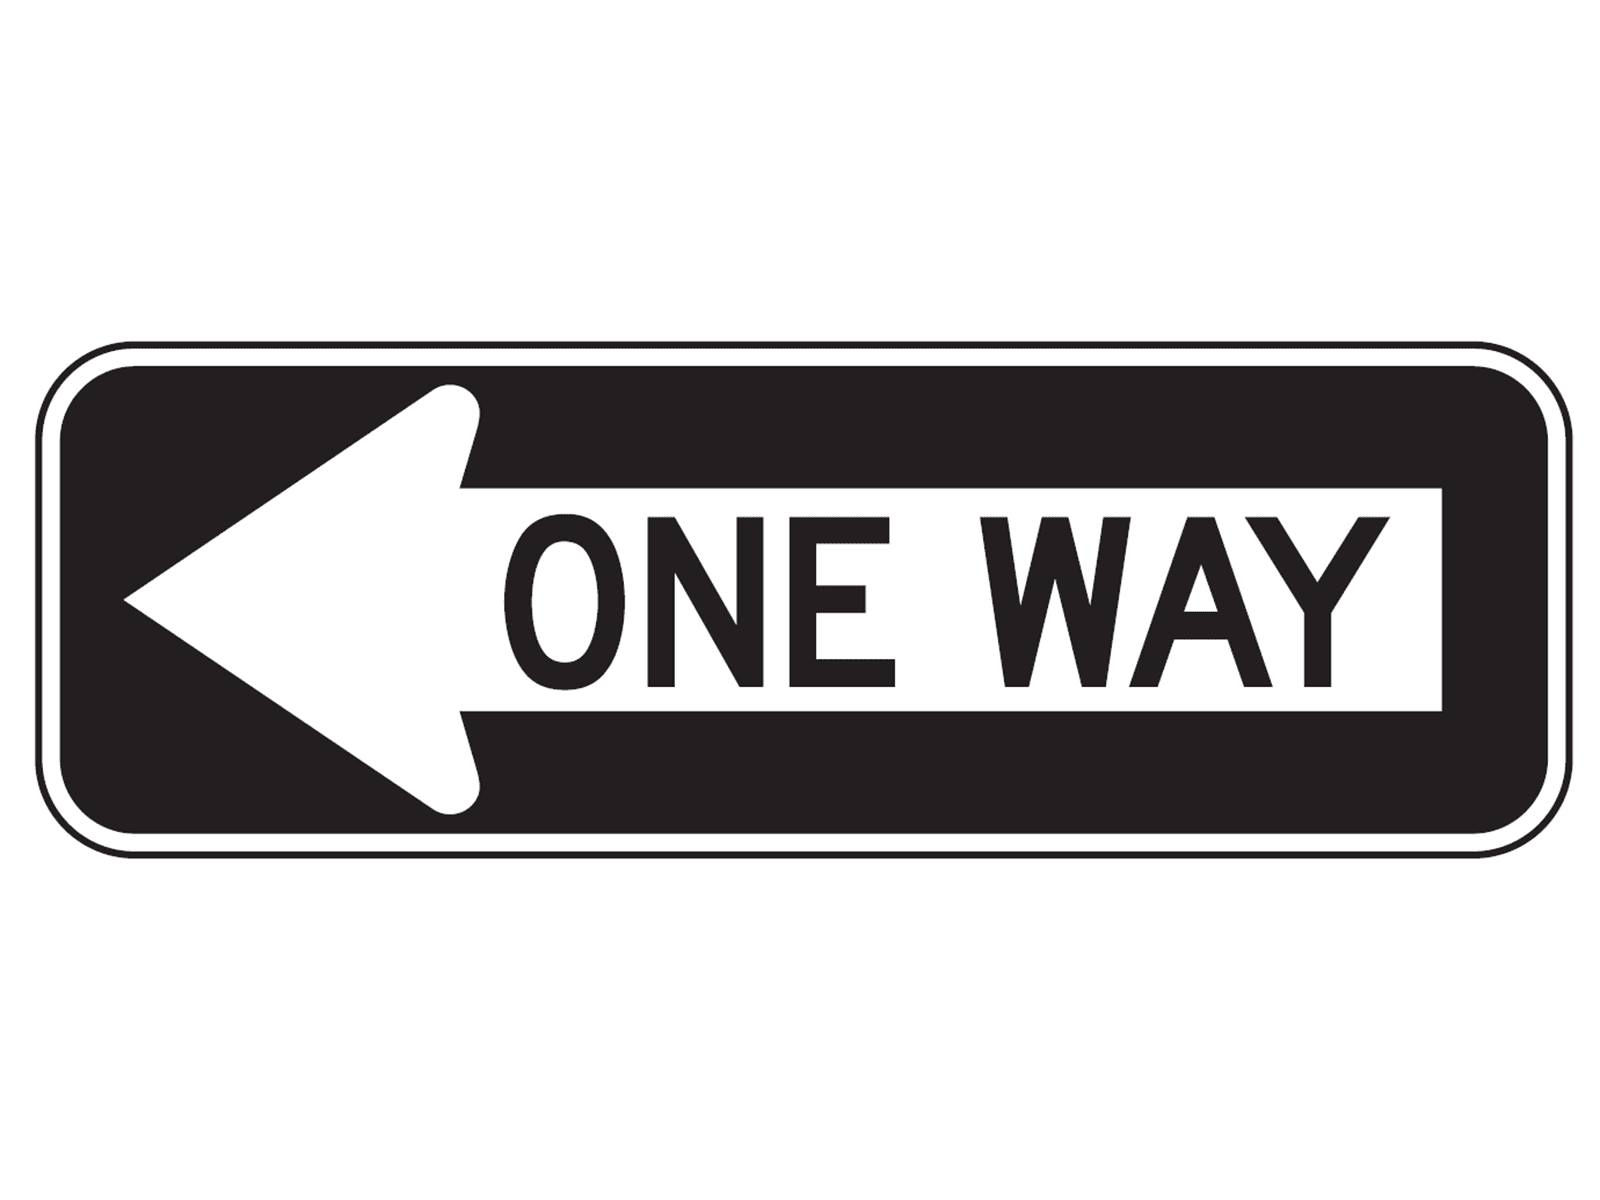 One Way R6-1L - R6: One Way and Divided Highway